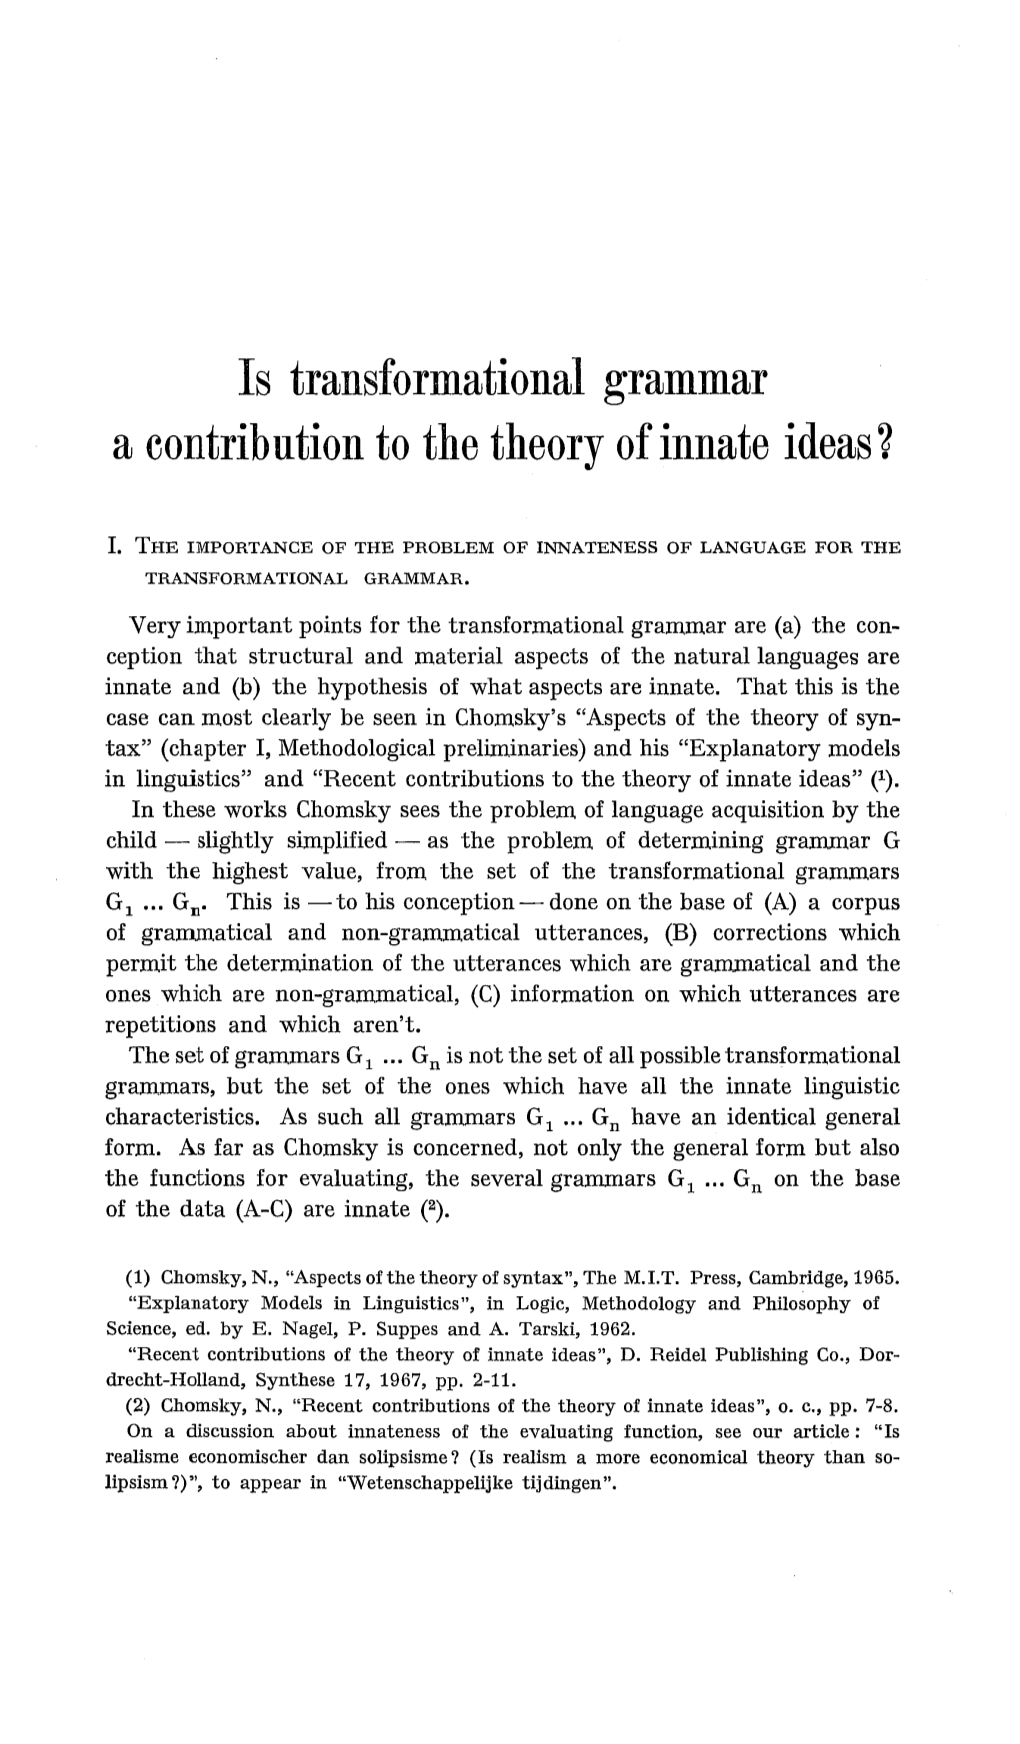 Is Transformational Grammar a Contribution to the Theory of Innate Ideas?